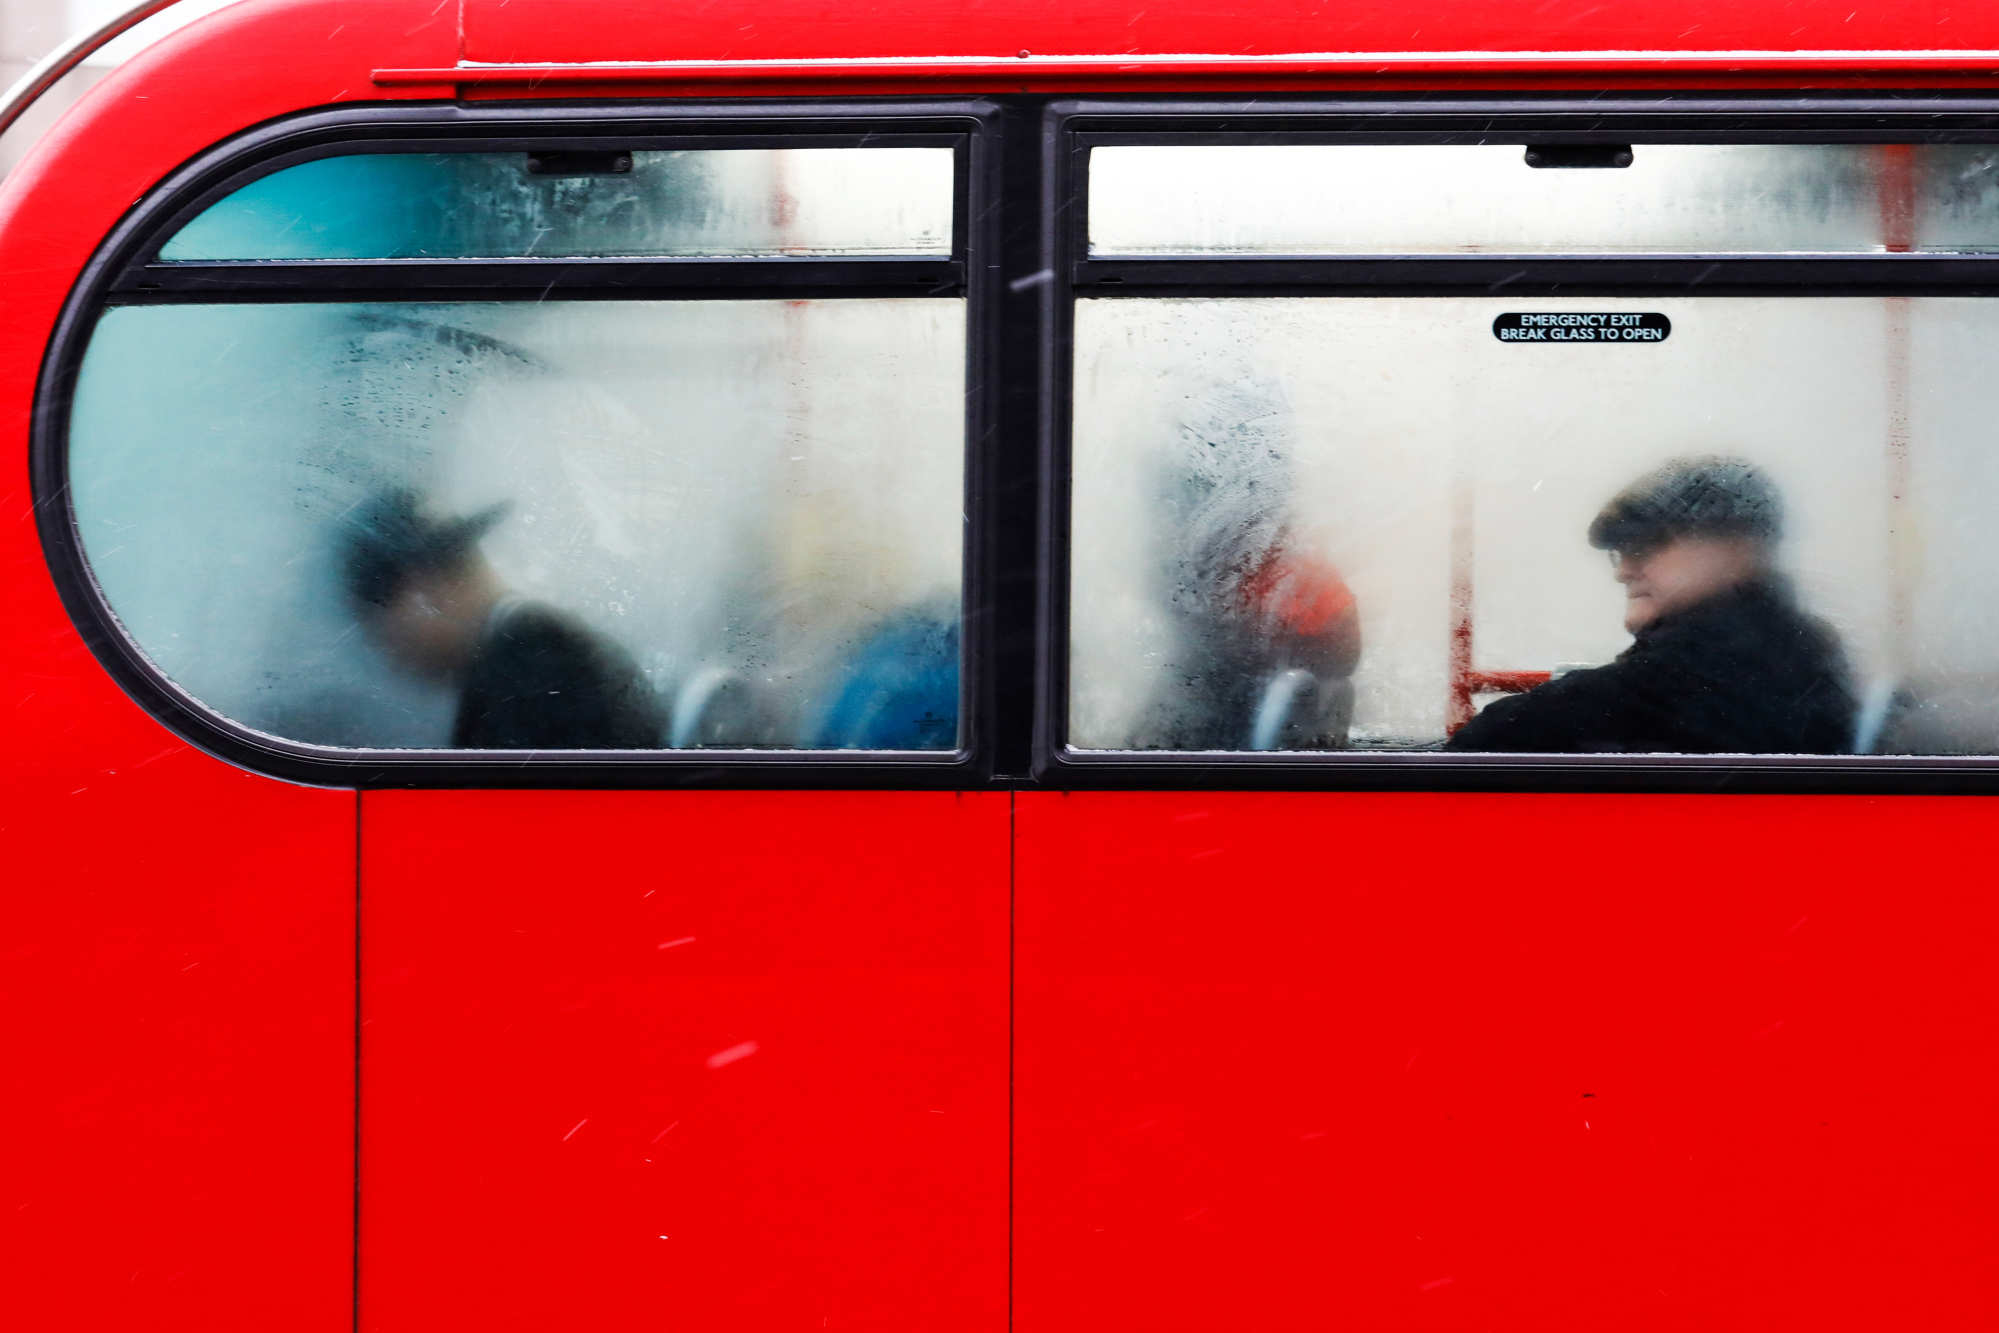 Commuters ride on a bus in London, U.K., on Thursday, March 1, 2018. The freezing weather entrenched across much of Europe is stretching Britain's supply of natural gas with fresh snowfall forecast for much of the country. Photographer: Luke MacGregor/Bloomberg